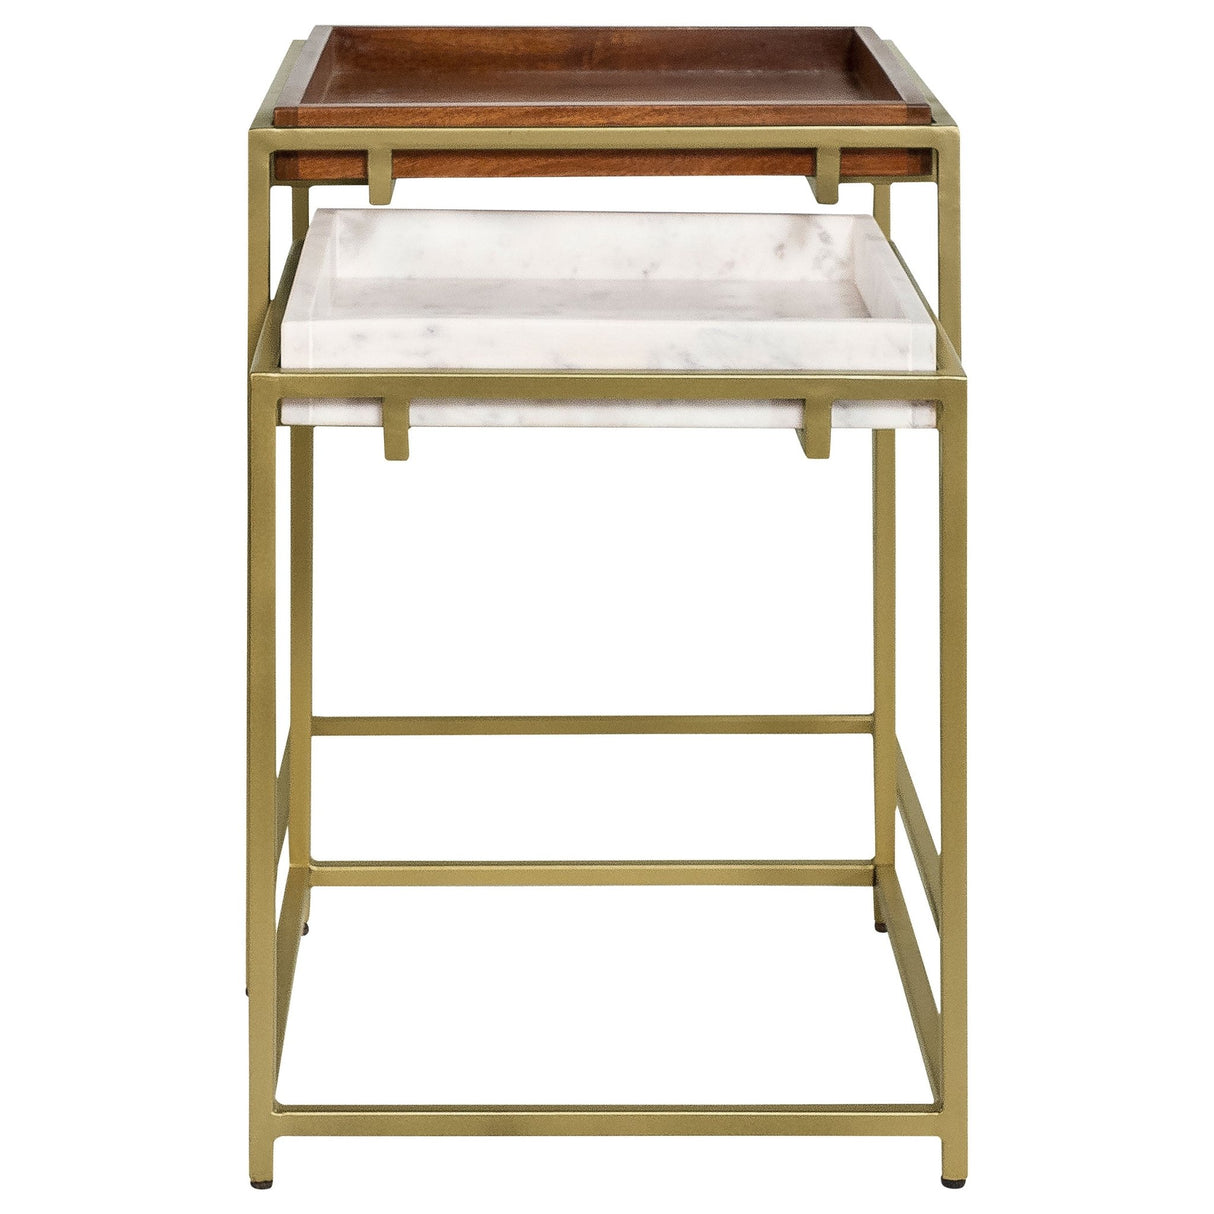 2 Pc Nesting Table - Bolden 2-Piece Square Nesting Table With Recessed Top Gold